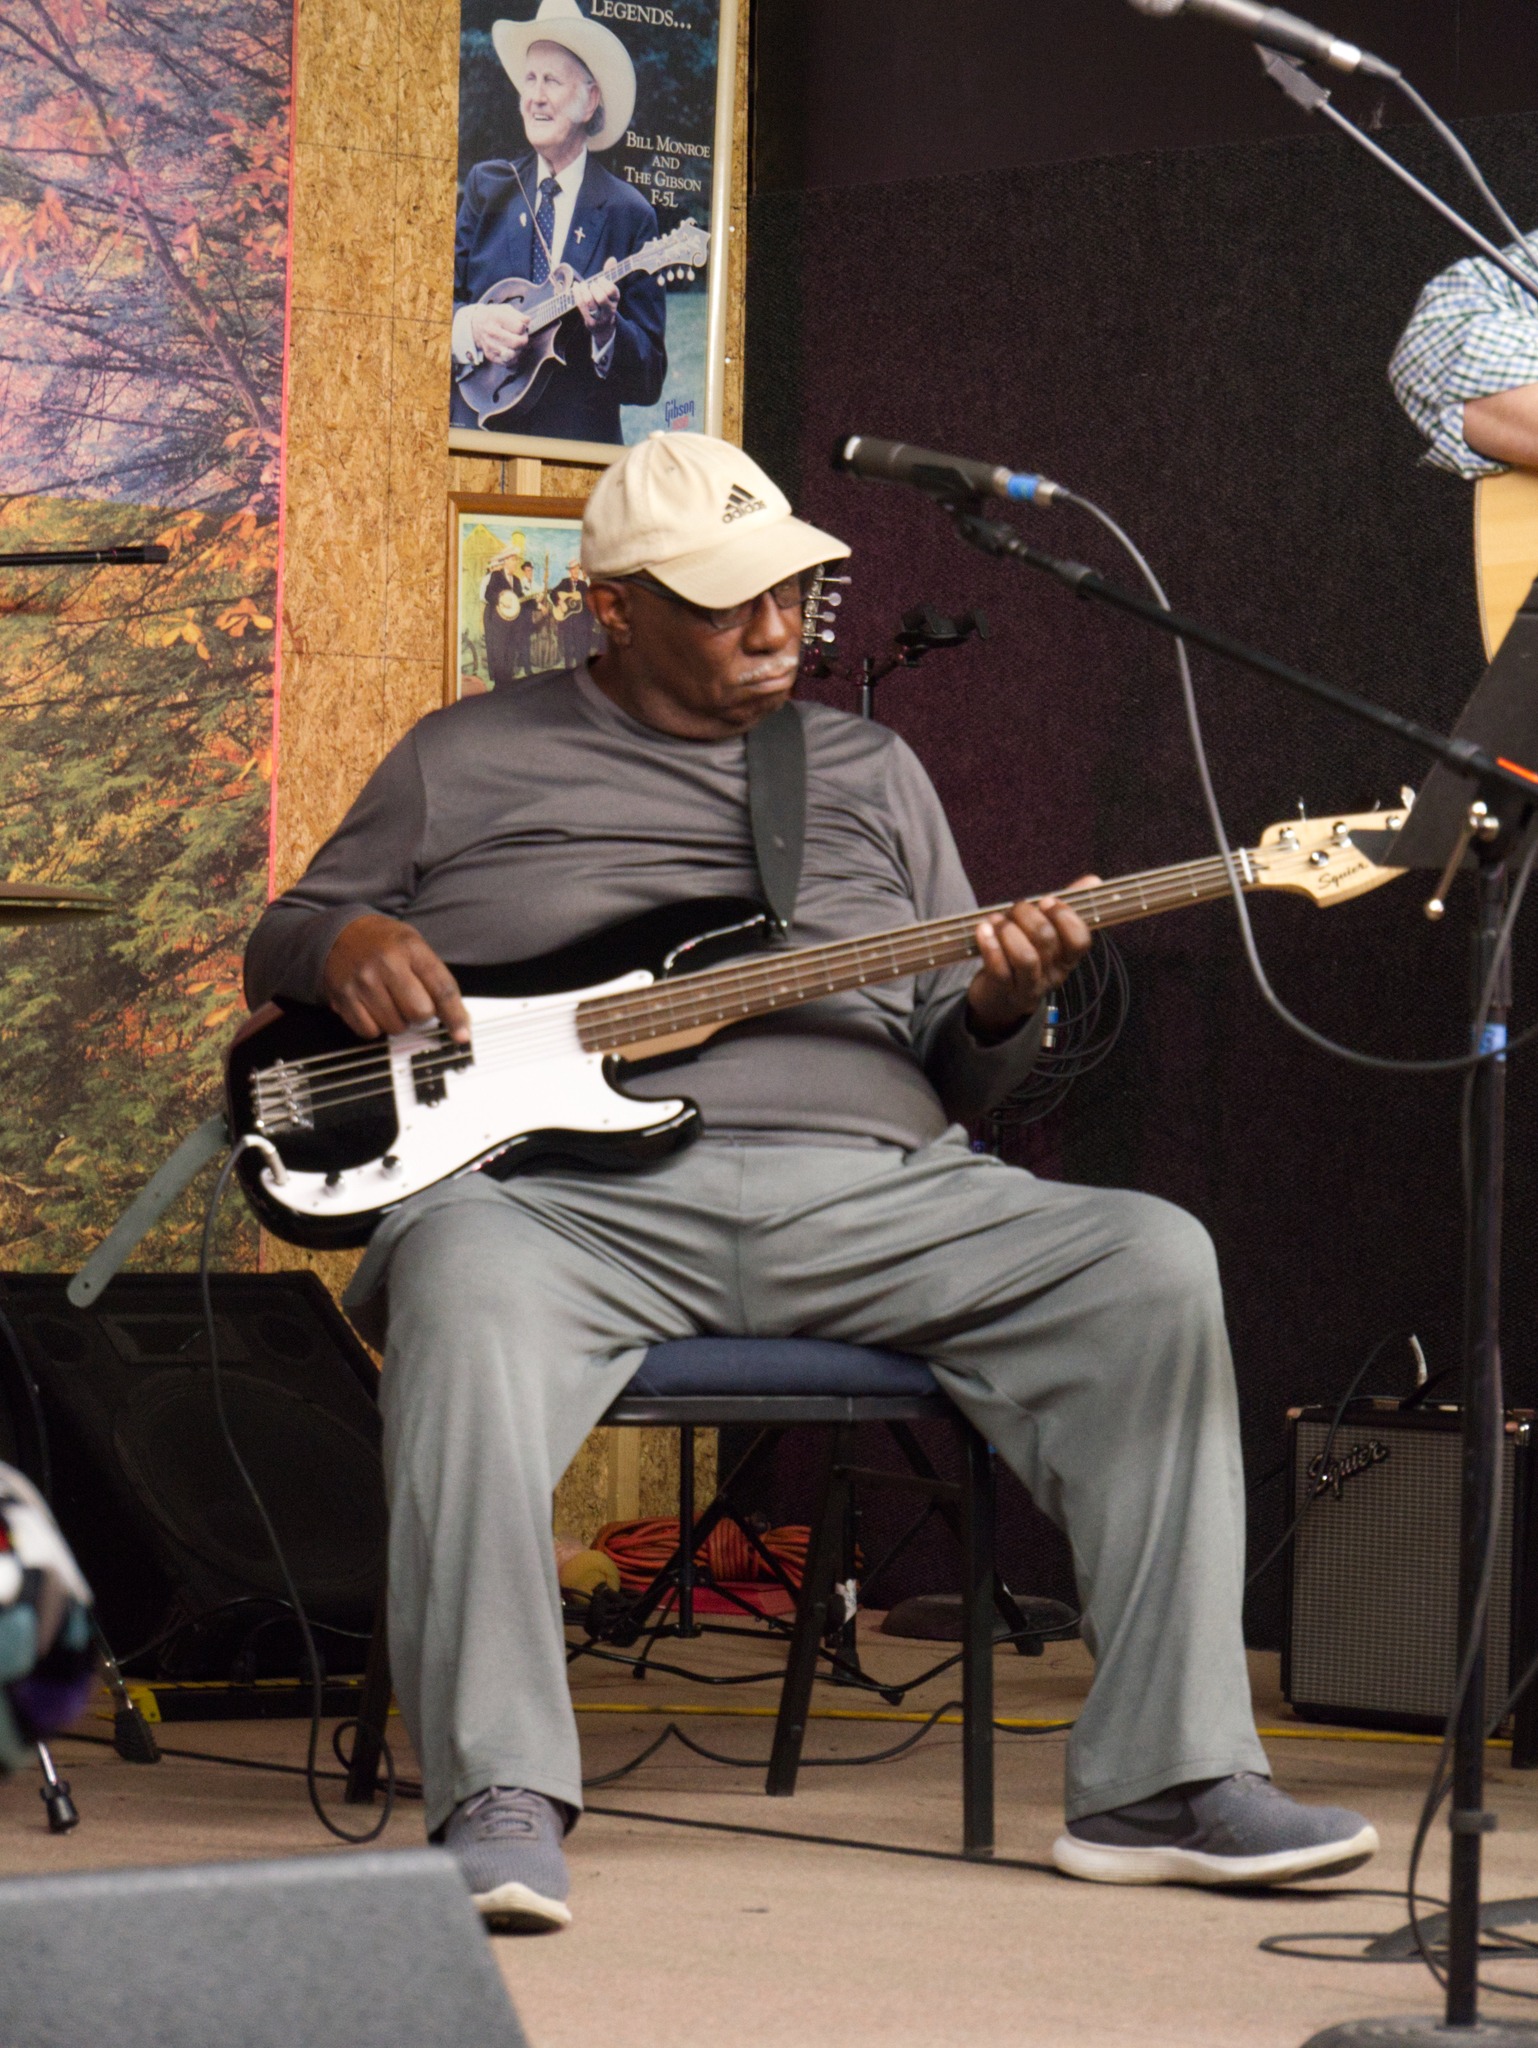 Jim performing with a bass student